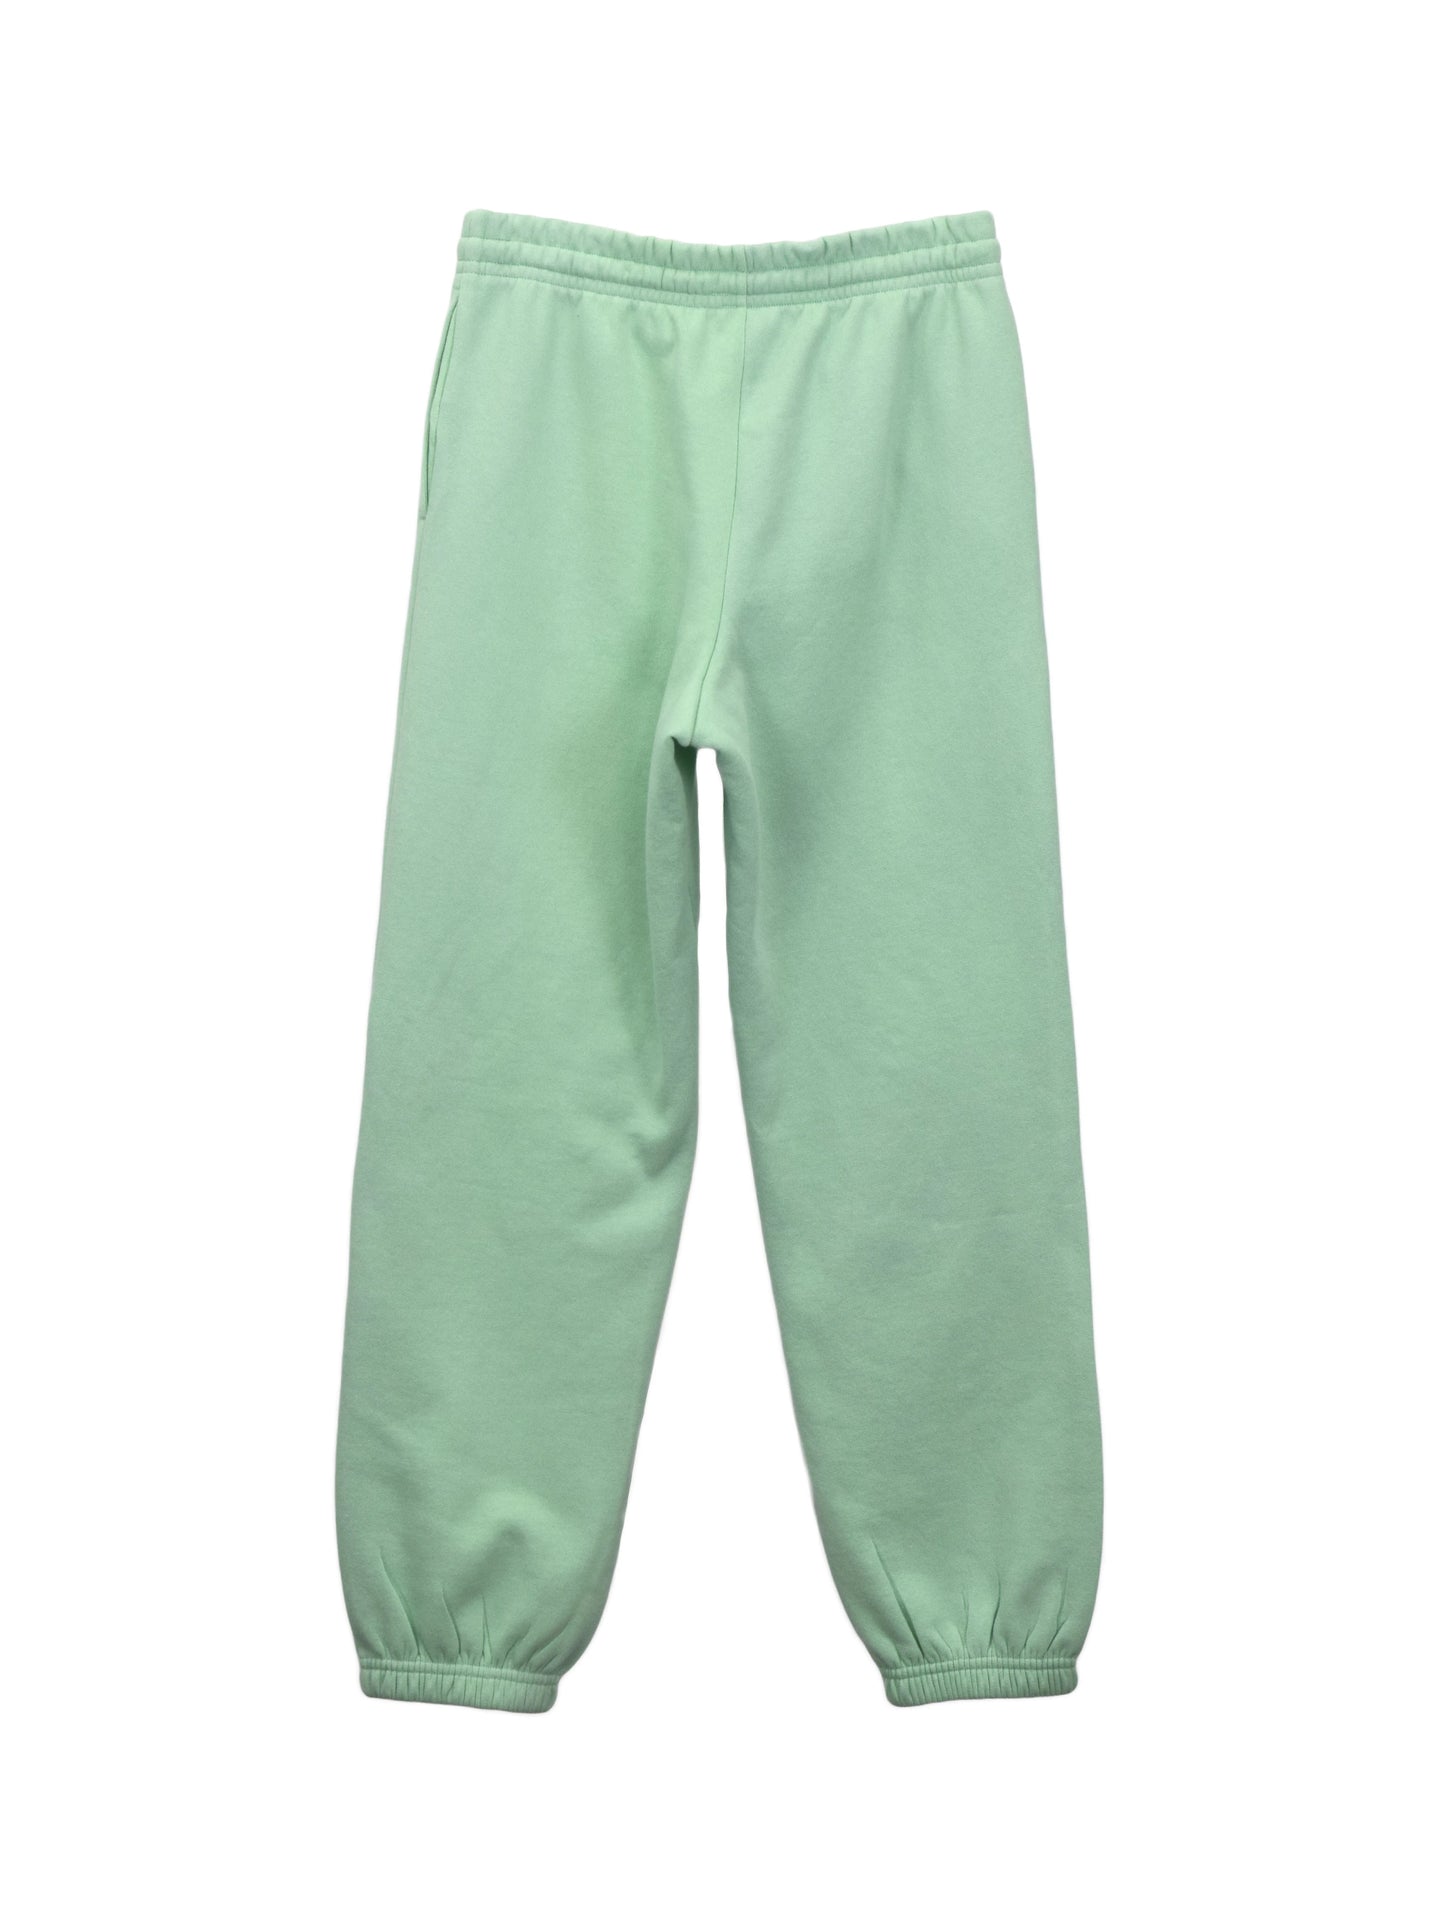 Back of Mint Green Sweatpants with Loose Ankle Cuffs